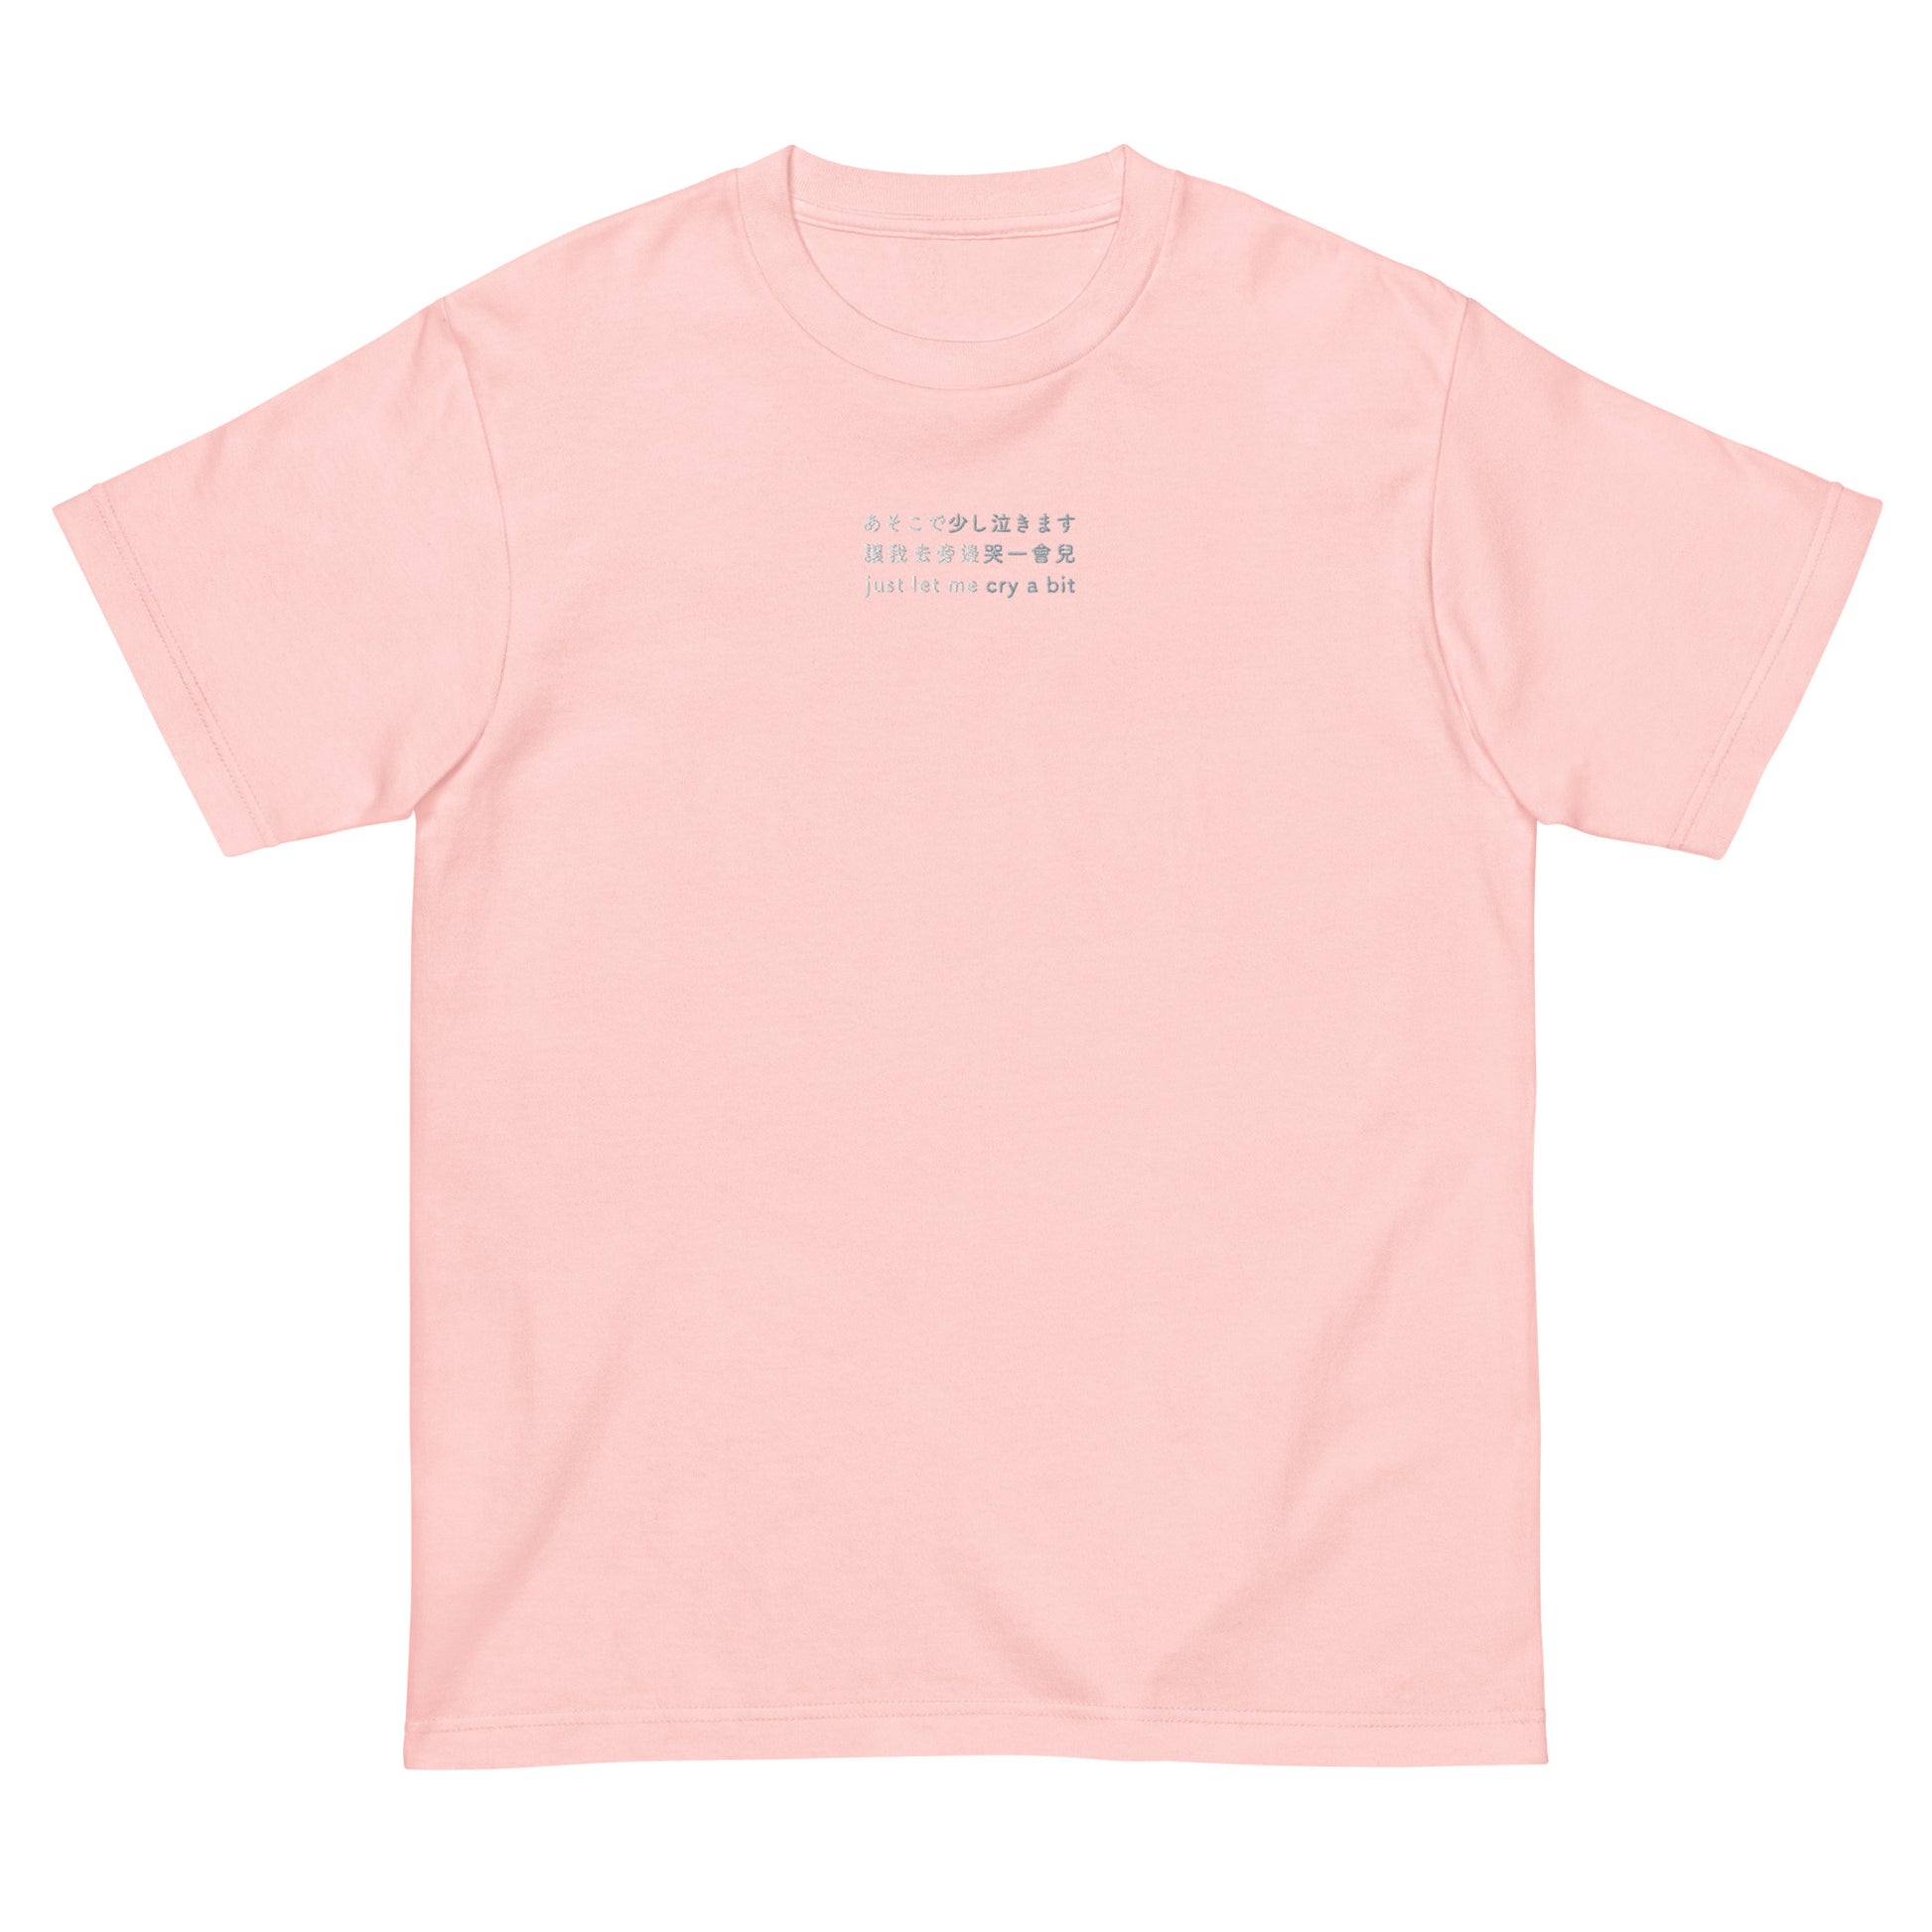 Pink High Quality Tee - Front Design with an White,Light Gray Embroidery "Just Let Me Cry A Bit" in Japanese,Chinese and English